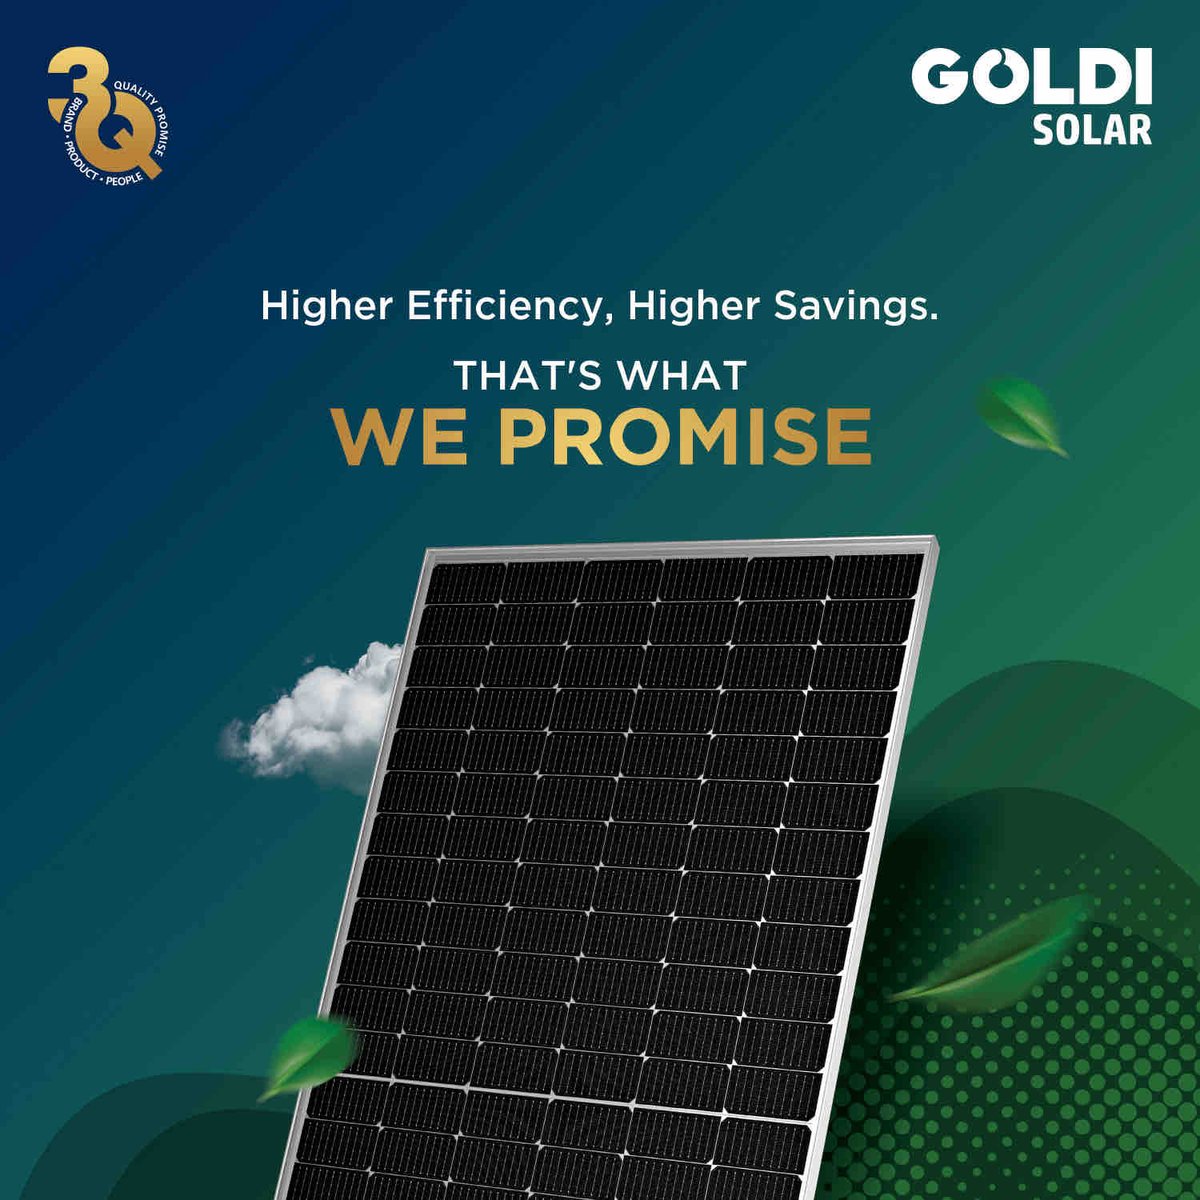 We promise to have a greener world, a better future for generations to come and a cleaner space for young minds to thrive.

#goldi #goldisolar #solarpower #solarenergy #summer #electricitybill #summersavings #savings #sustainbility #sustainable #greenenergy #cleanenergy